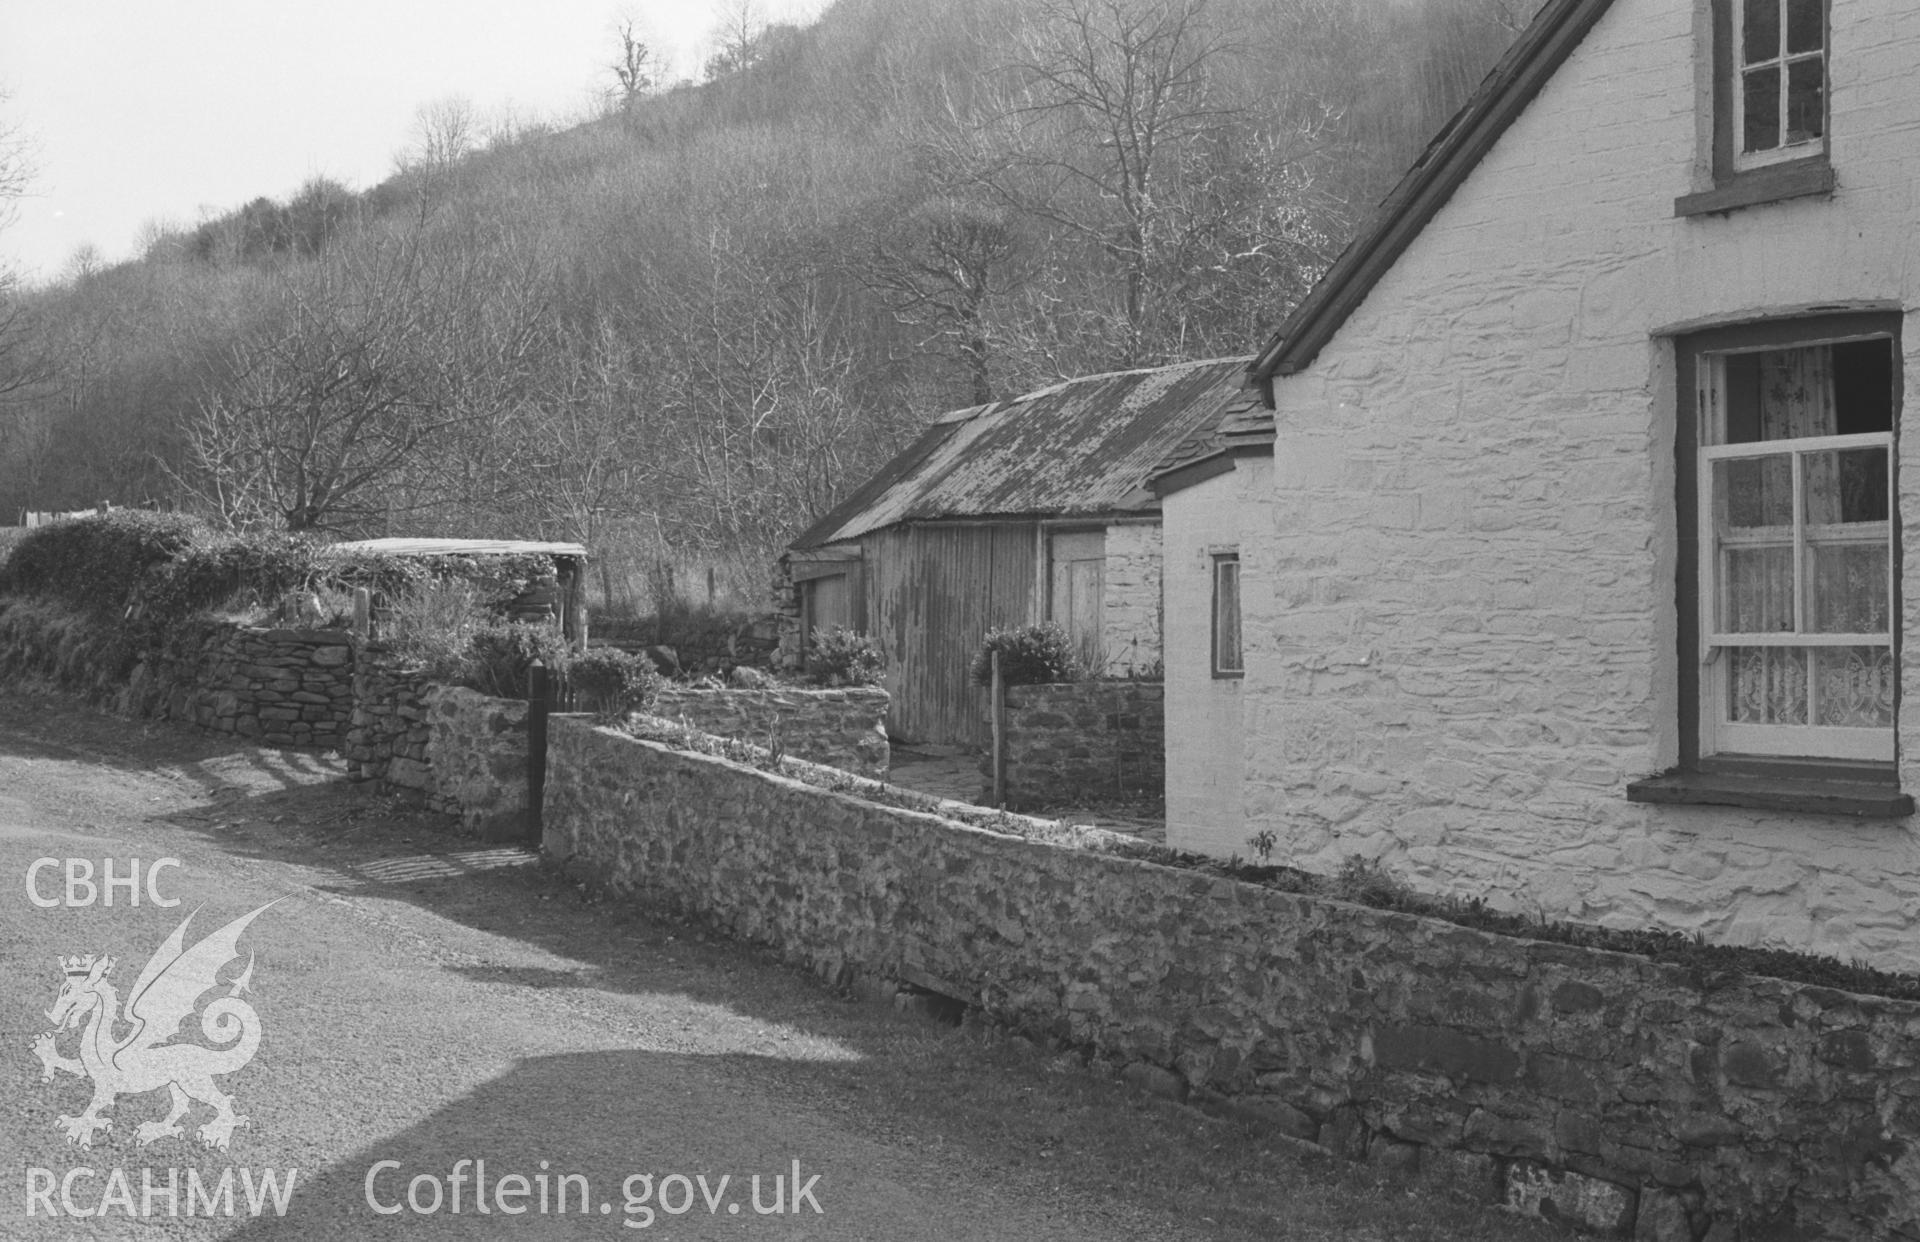 Black and White photograph showing the south western end of cottage at Dol Boeth near Llanrhystyd. Photographed by Arthur Chater in April 1963 from Grid Reference SN 549 691, looking south.